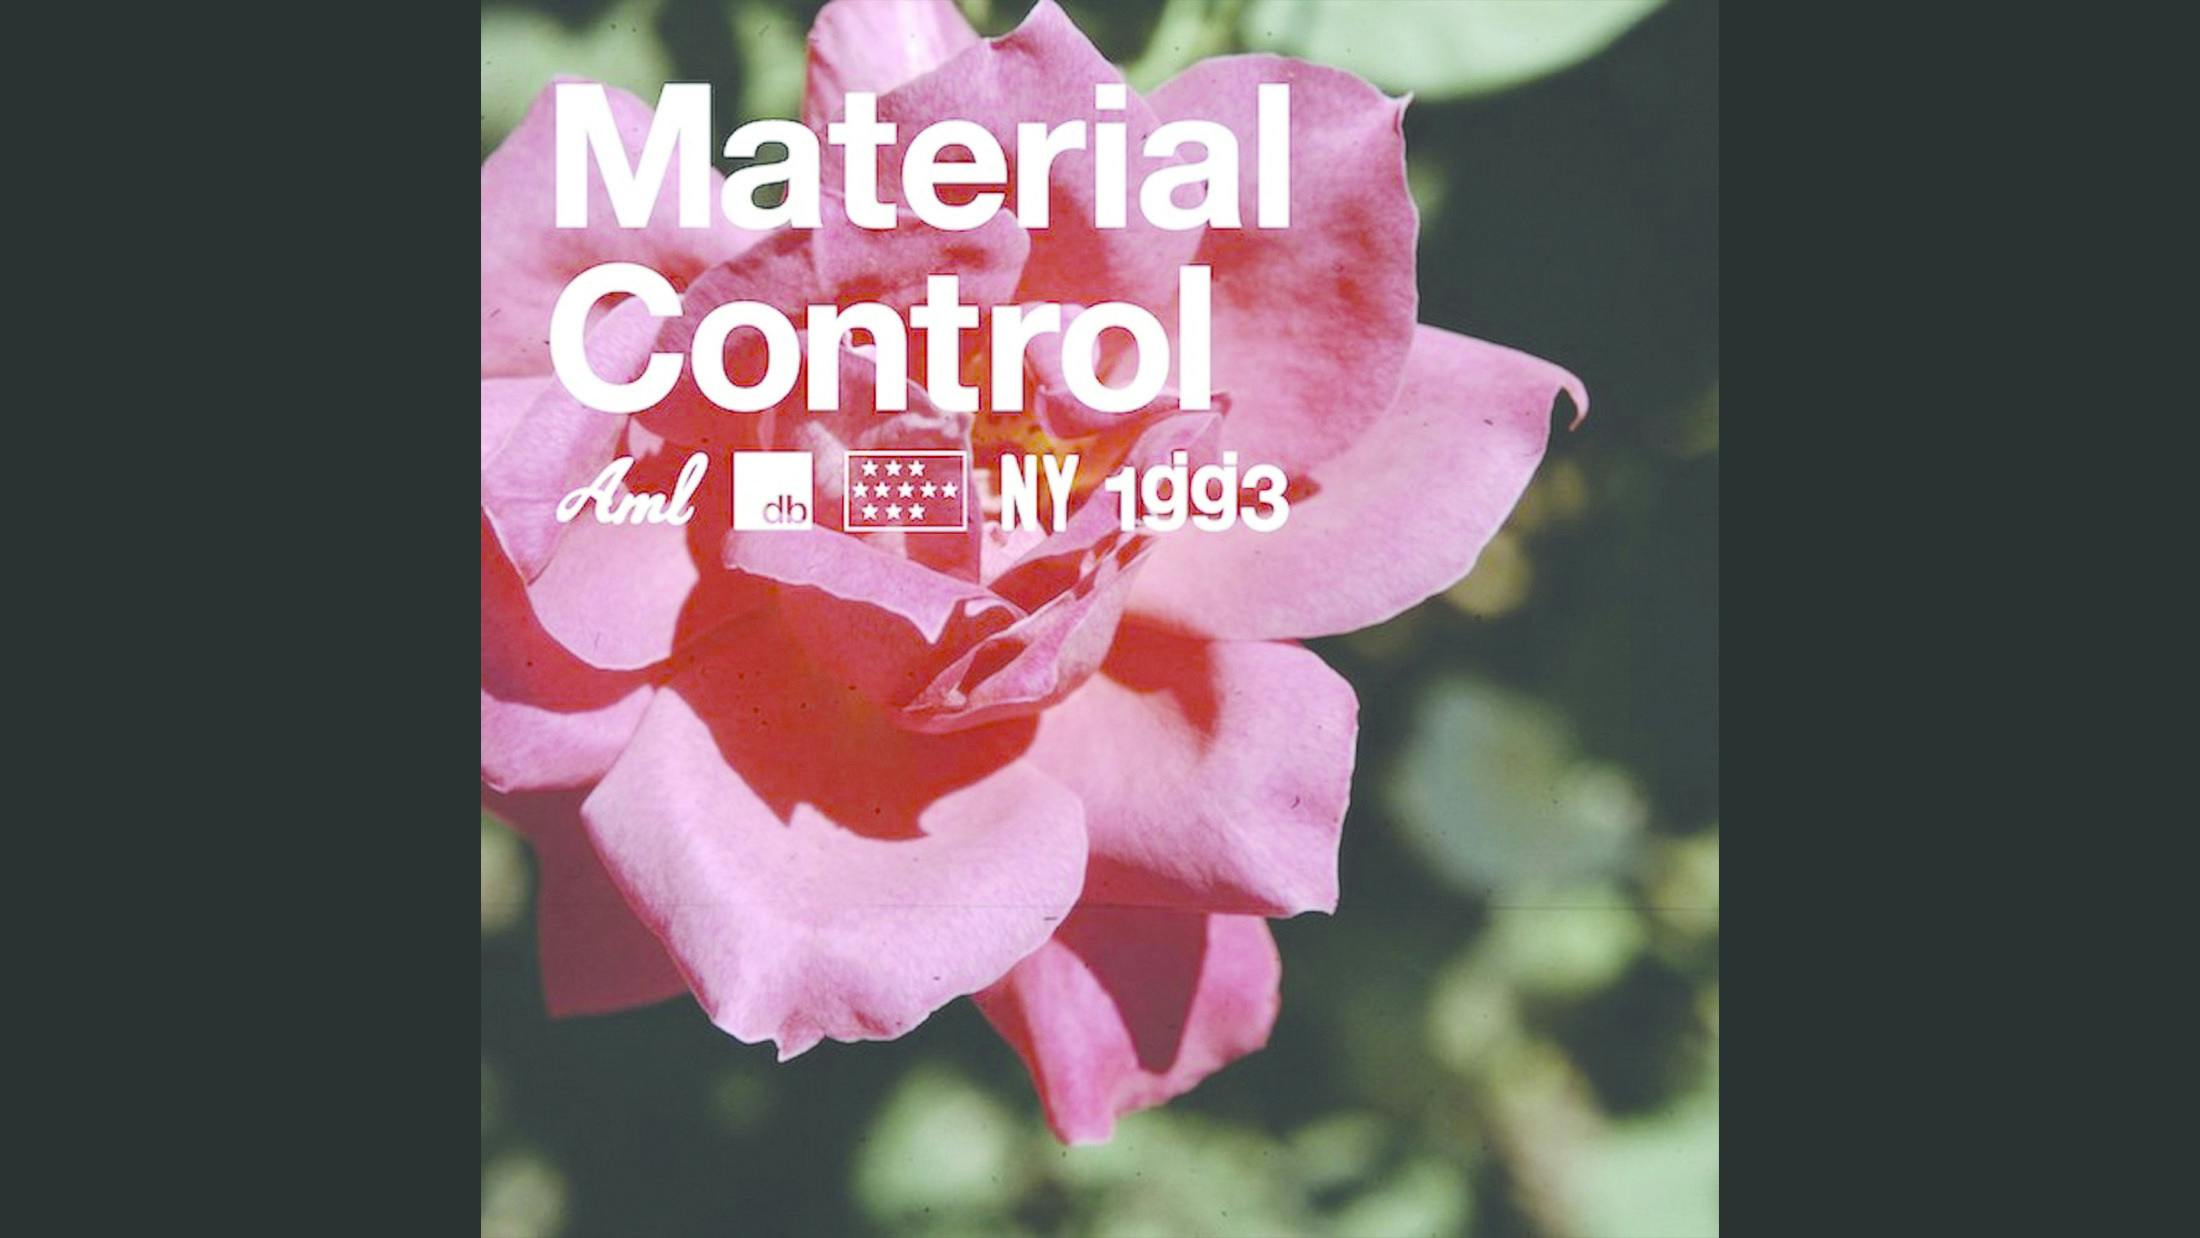 Material control marks post-hardcore heroes Glassjaw’s first new music in six years, and their first album in 15. Other ventures may have proved distractions for Daryl Palumbo and Justin Beck, but their surprise-released third album found their chemistry intact. Spanning shivering ambience (Strange Hours) and ’90s rock nirvana (My Conscience Ways A Ton), Material 
Control consolidated Glassjaw’s status as an essential force.